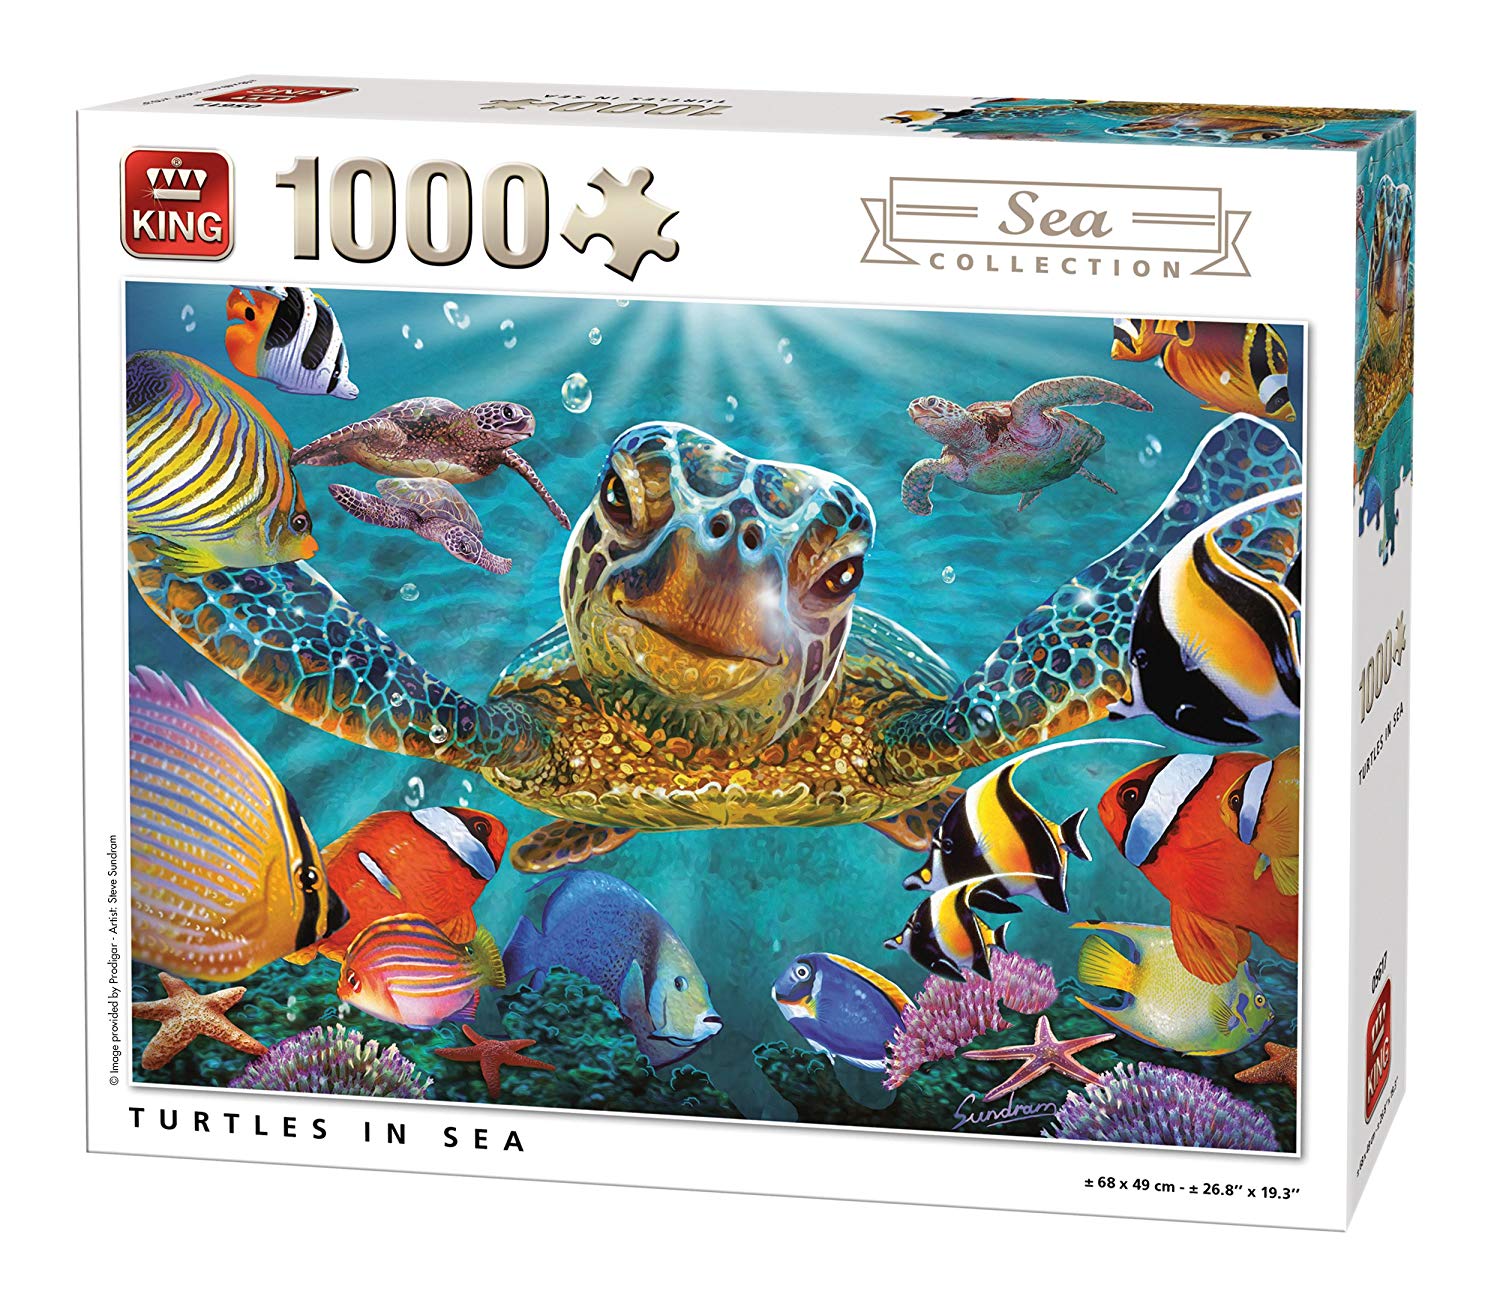 King 5617 Tortoise In Sea Underwater Jigsaw Puzzle (1000 Pieces)